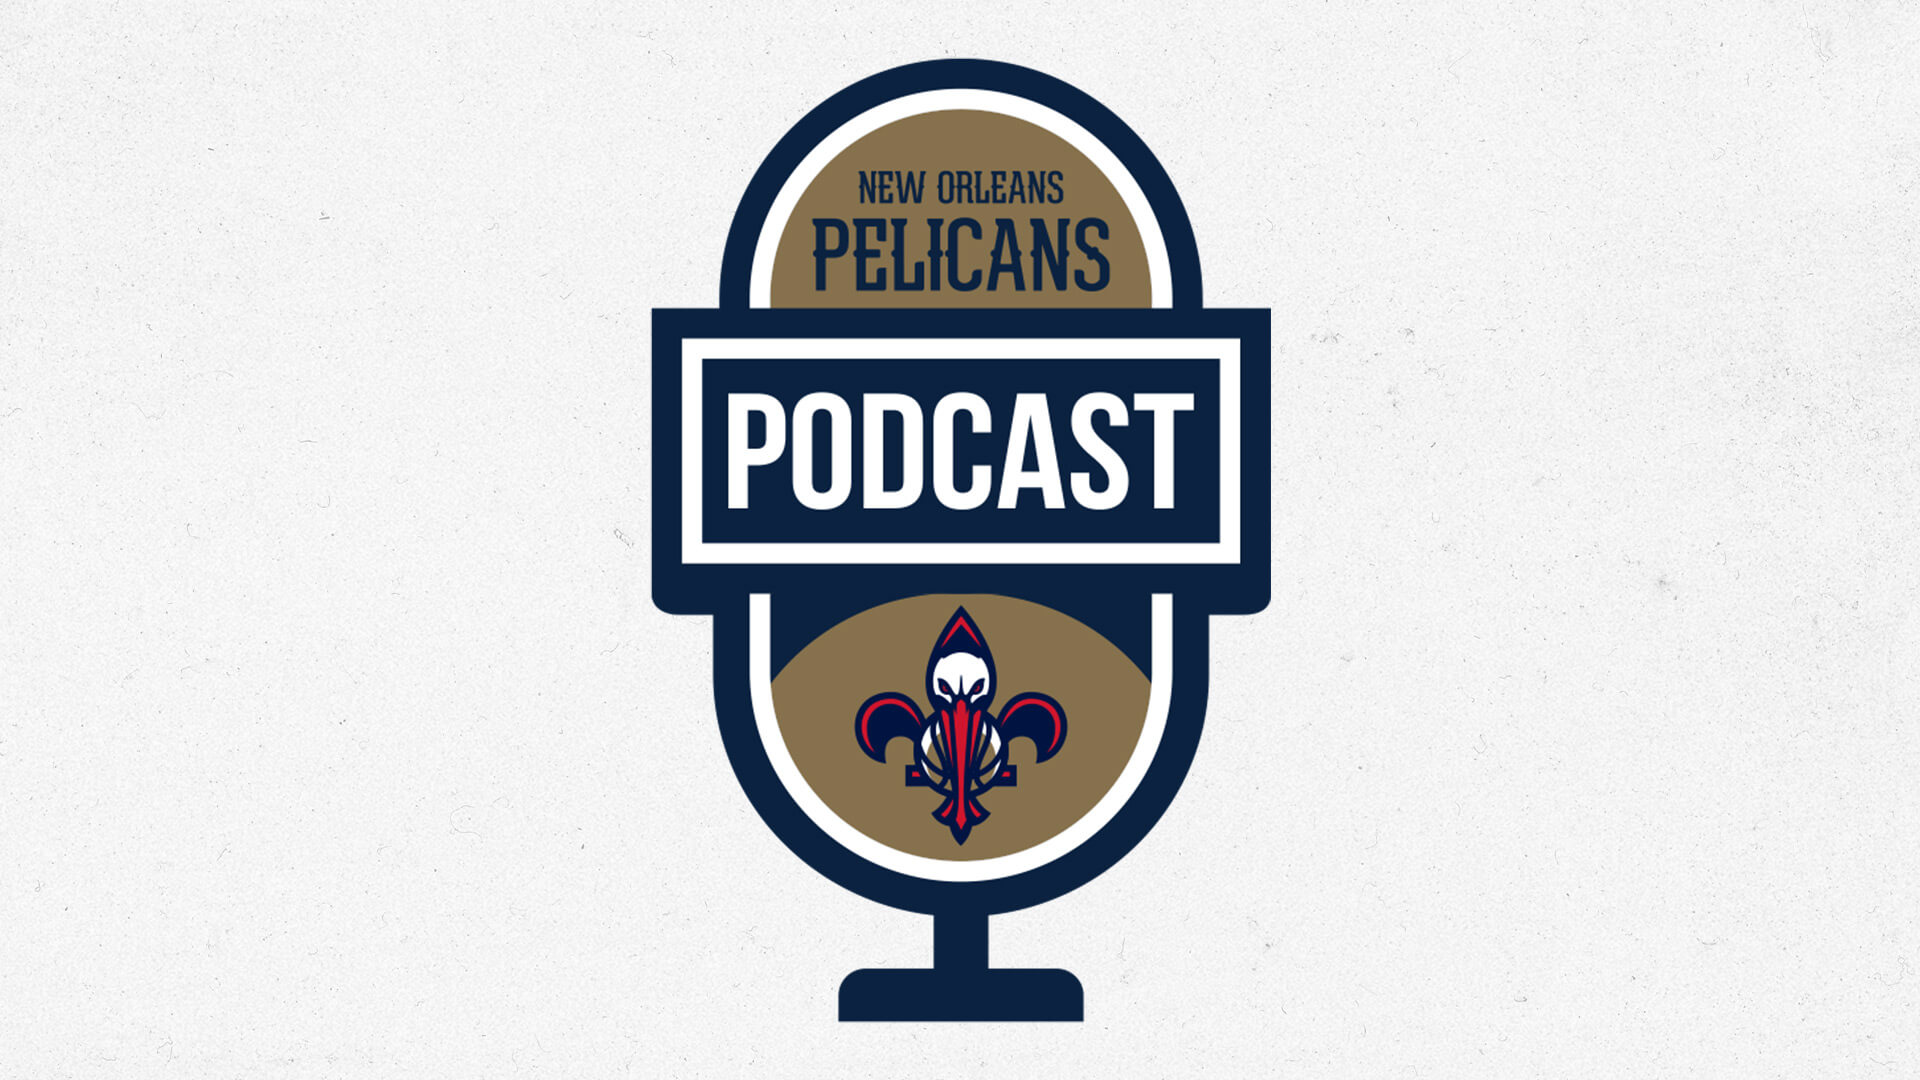 Pelicans vs. Phoenix Suns preview, NBA Western Conference playoff race | Pelicans Podcast